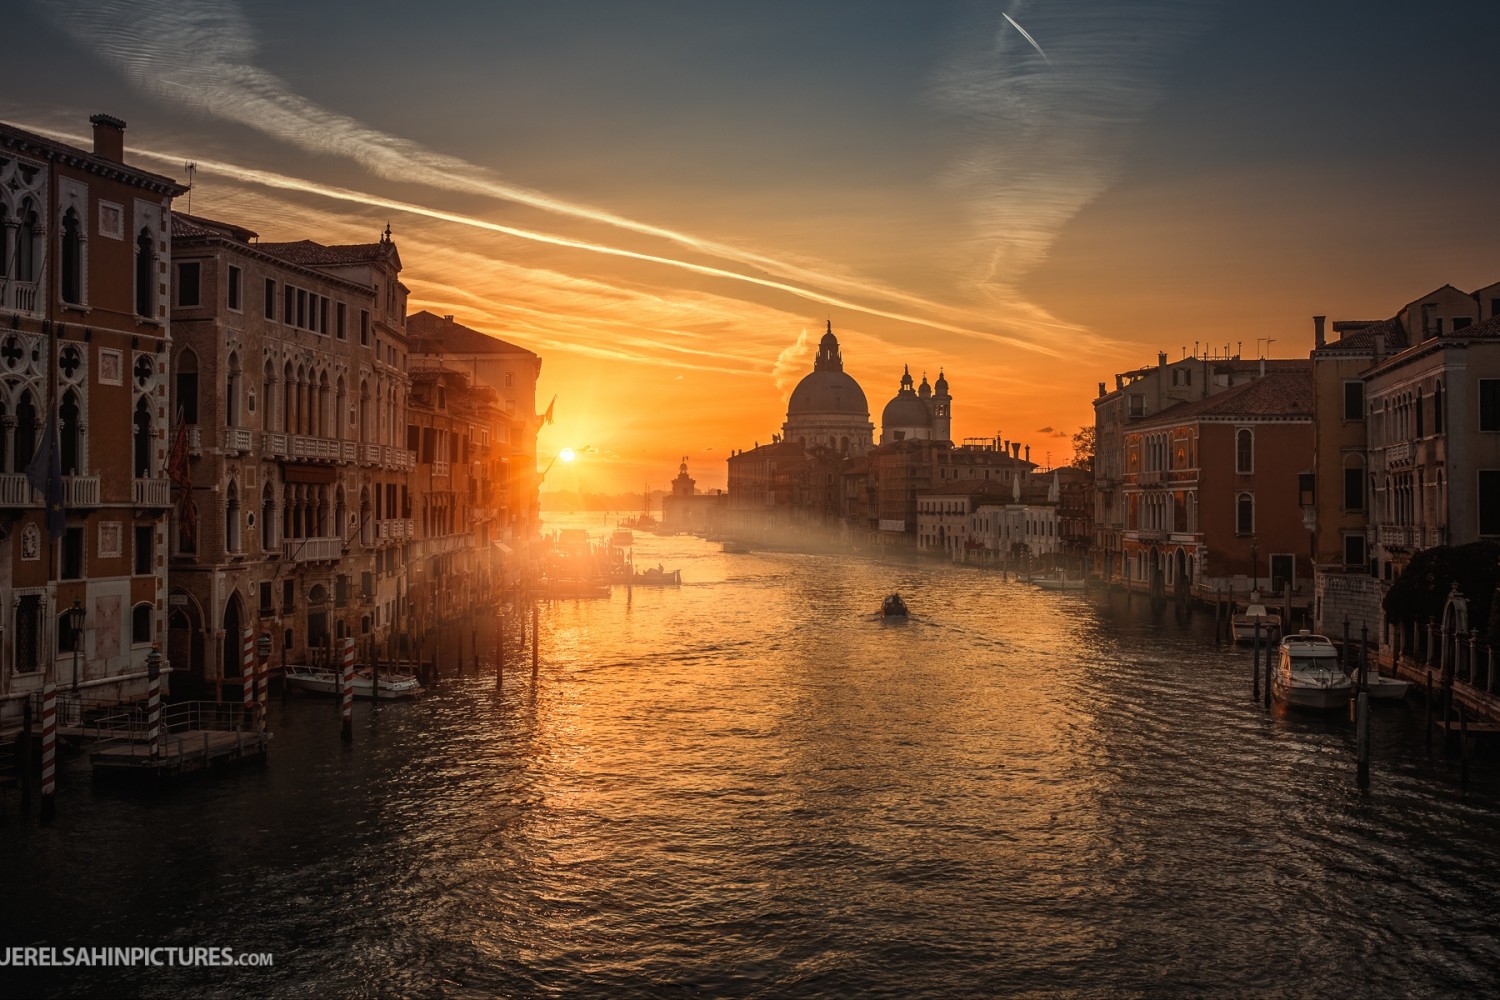 The Top 10 Most Photographed Cities on 500px, a Breathtaking Photo Tour